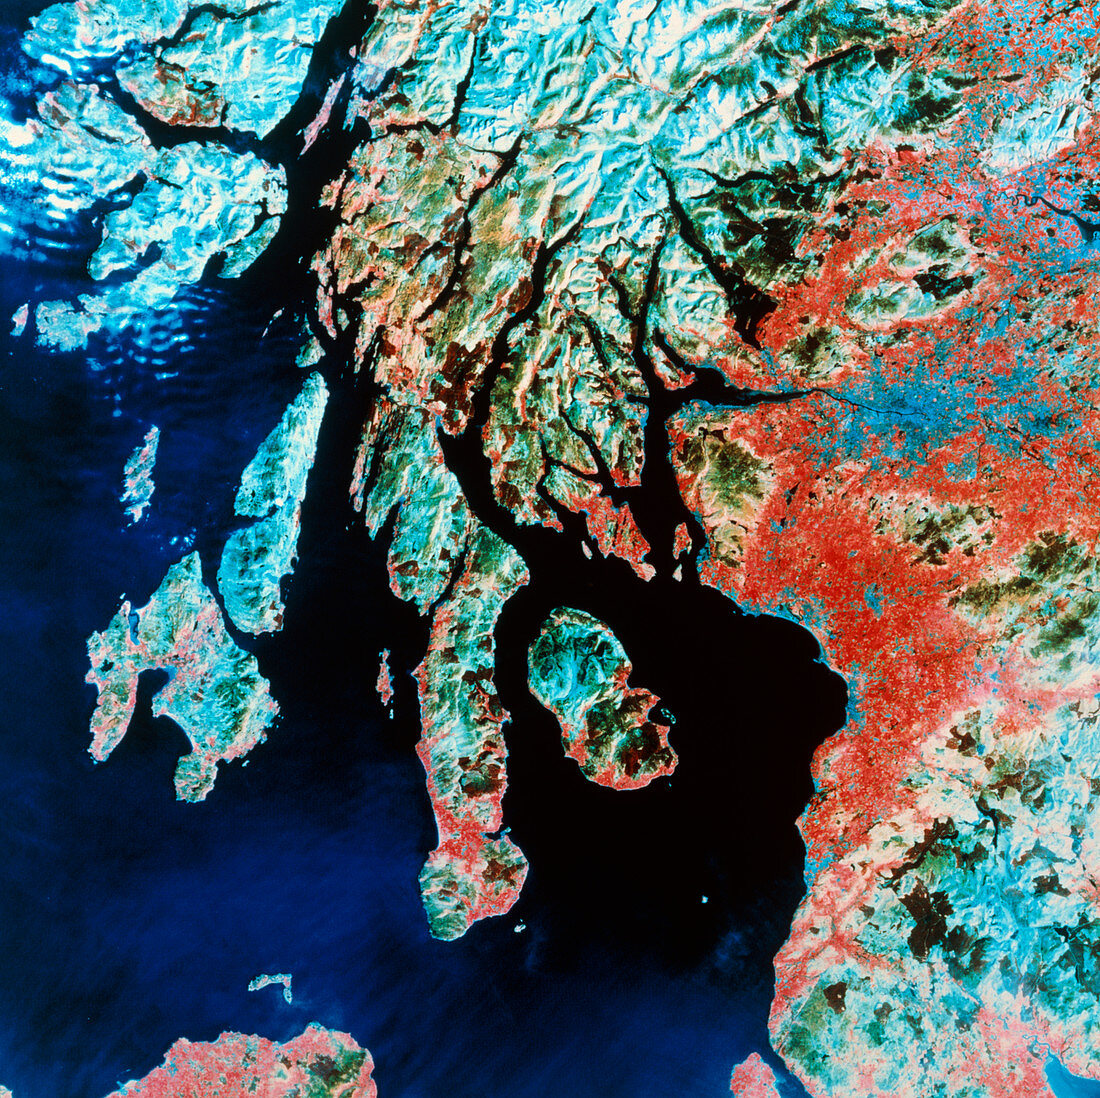 Landsat image of Glasgow and Firth of Clyde